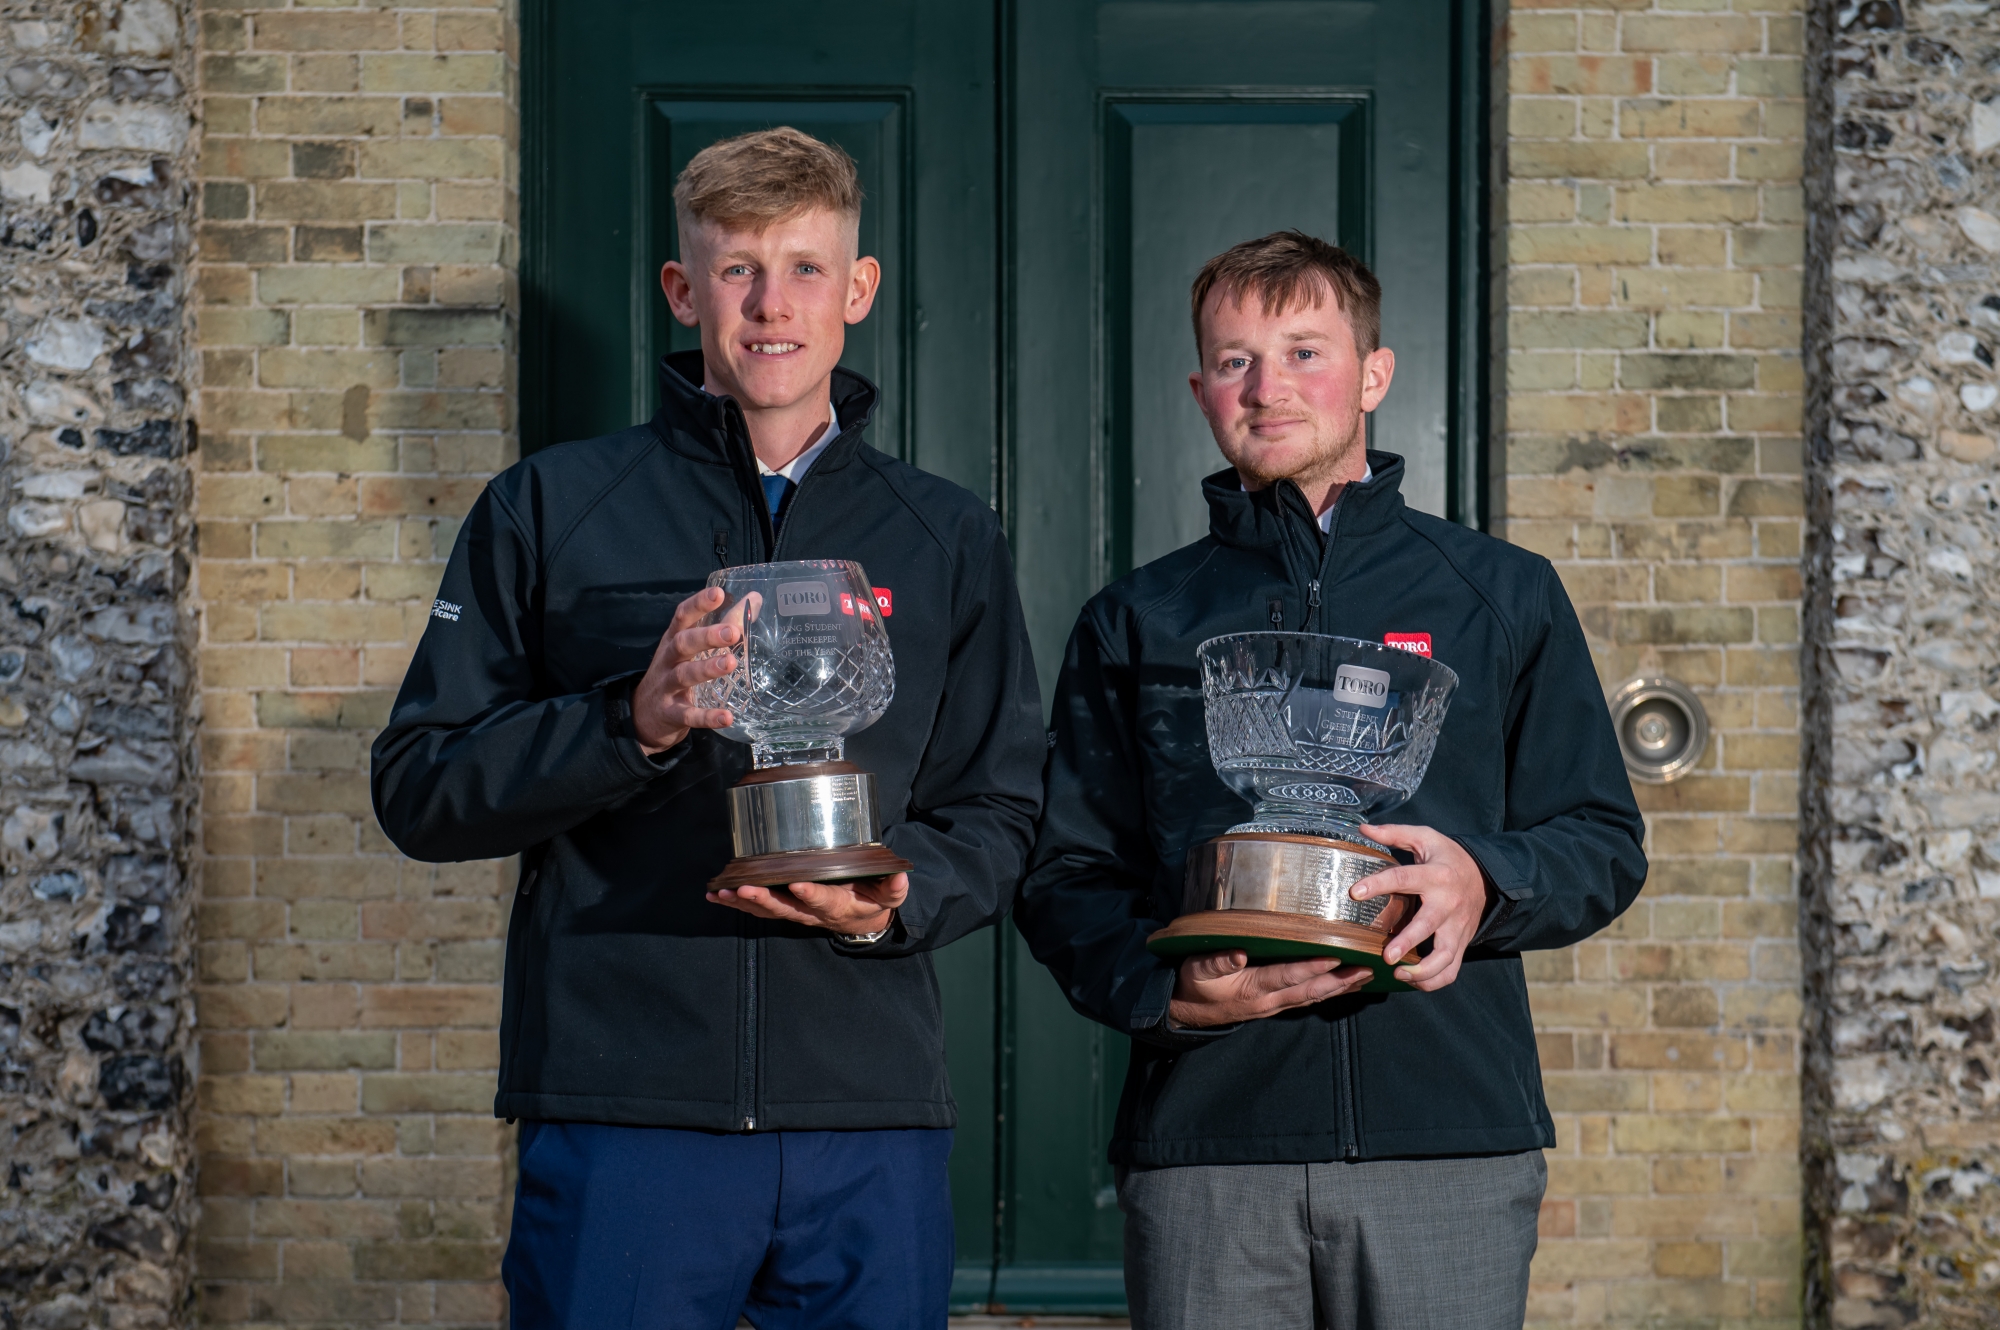 Awards winners Peter Pattenden and James Gaskell 2022